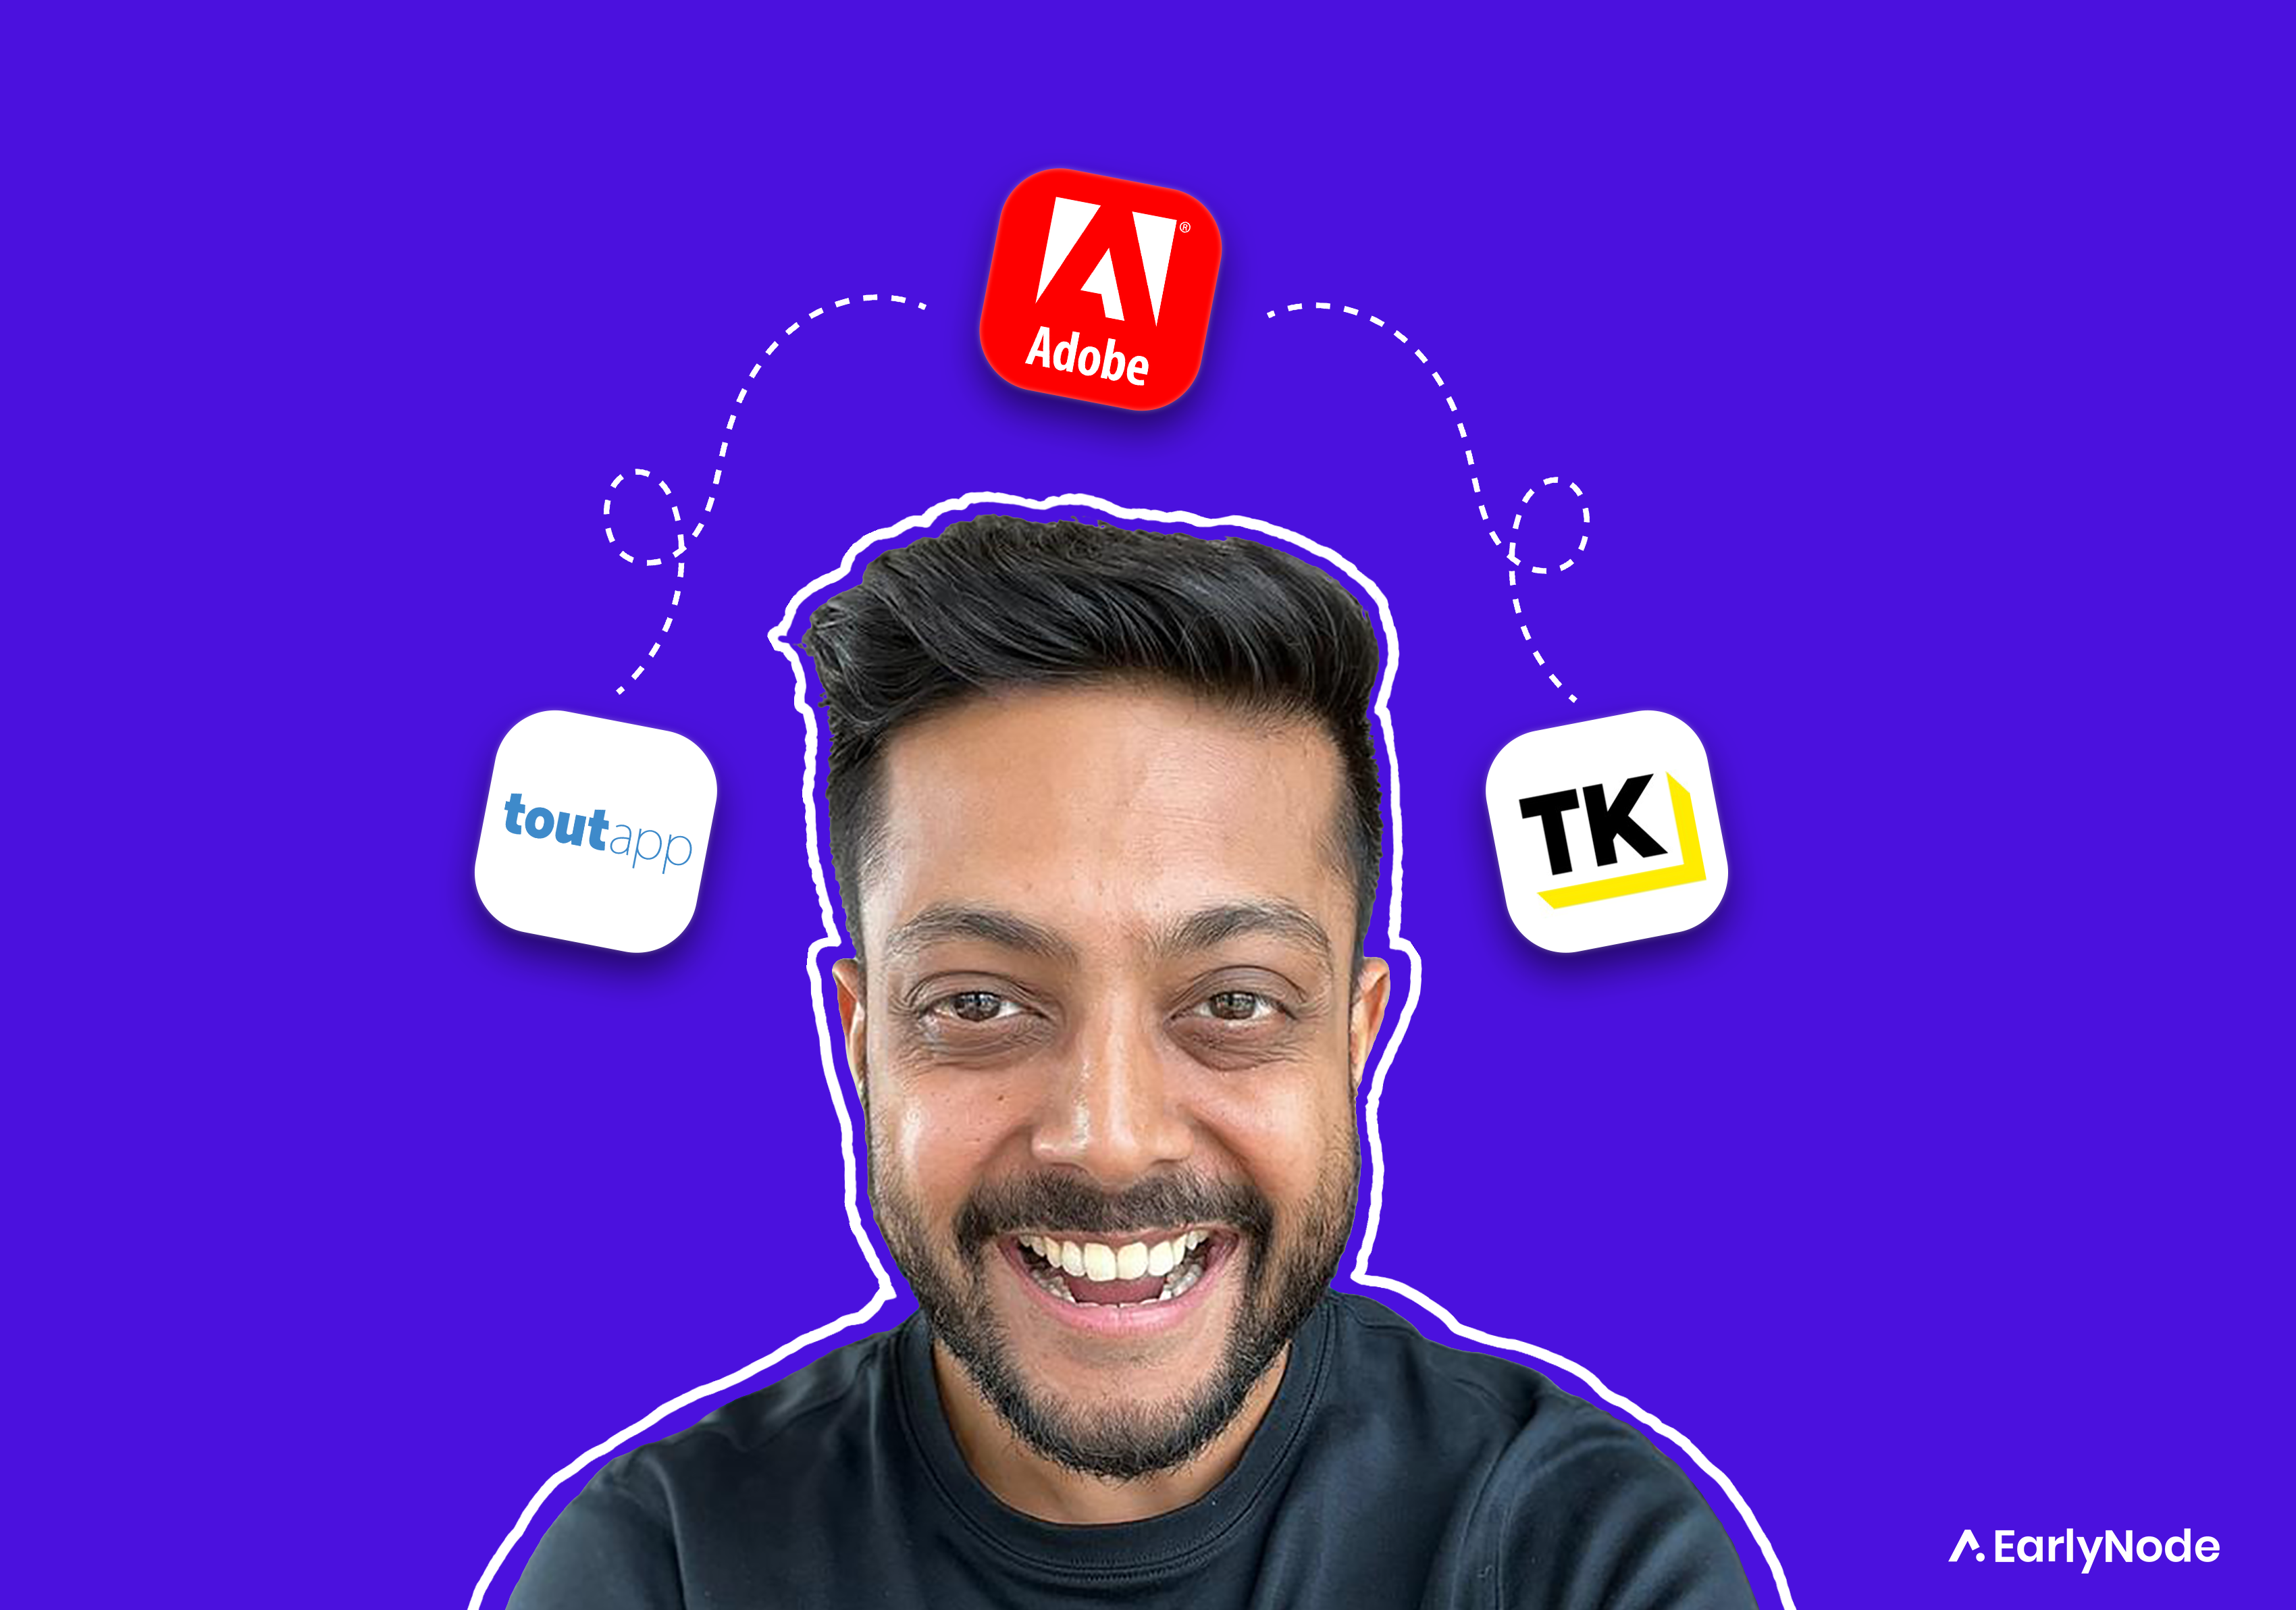 Build a Go-to-Market Machine with TK Kader (Sold ToutApp for $30m)